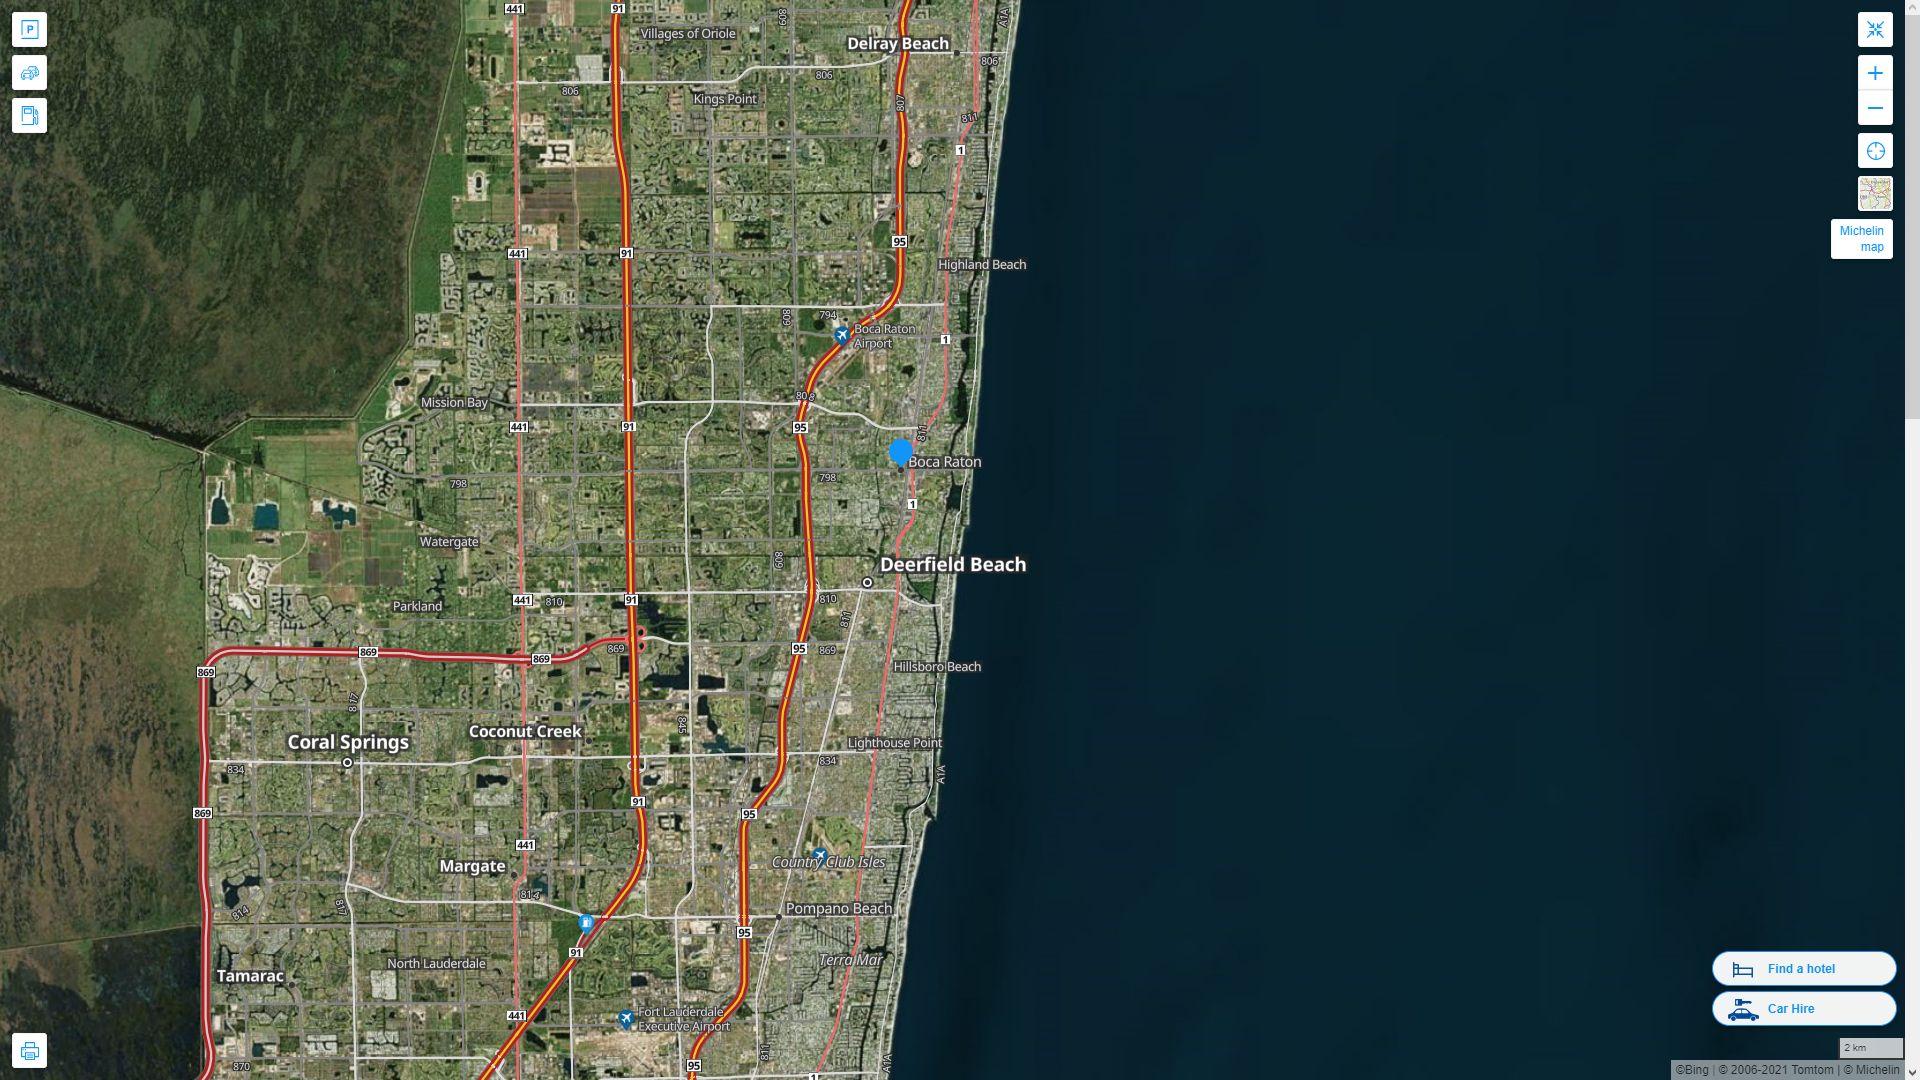 Boca Raton Florida Highway and Road Map with Satellite View